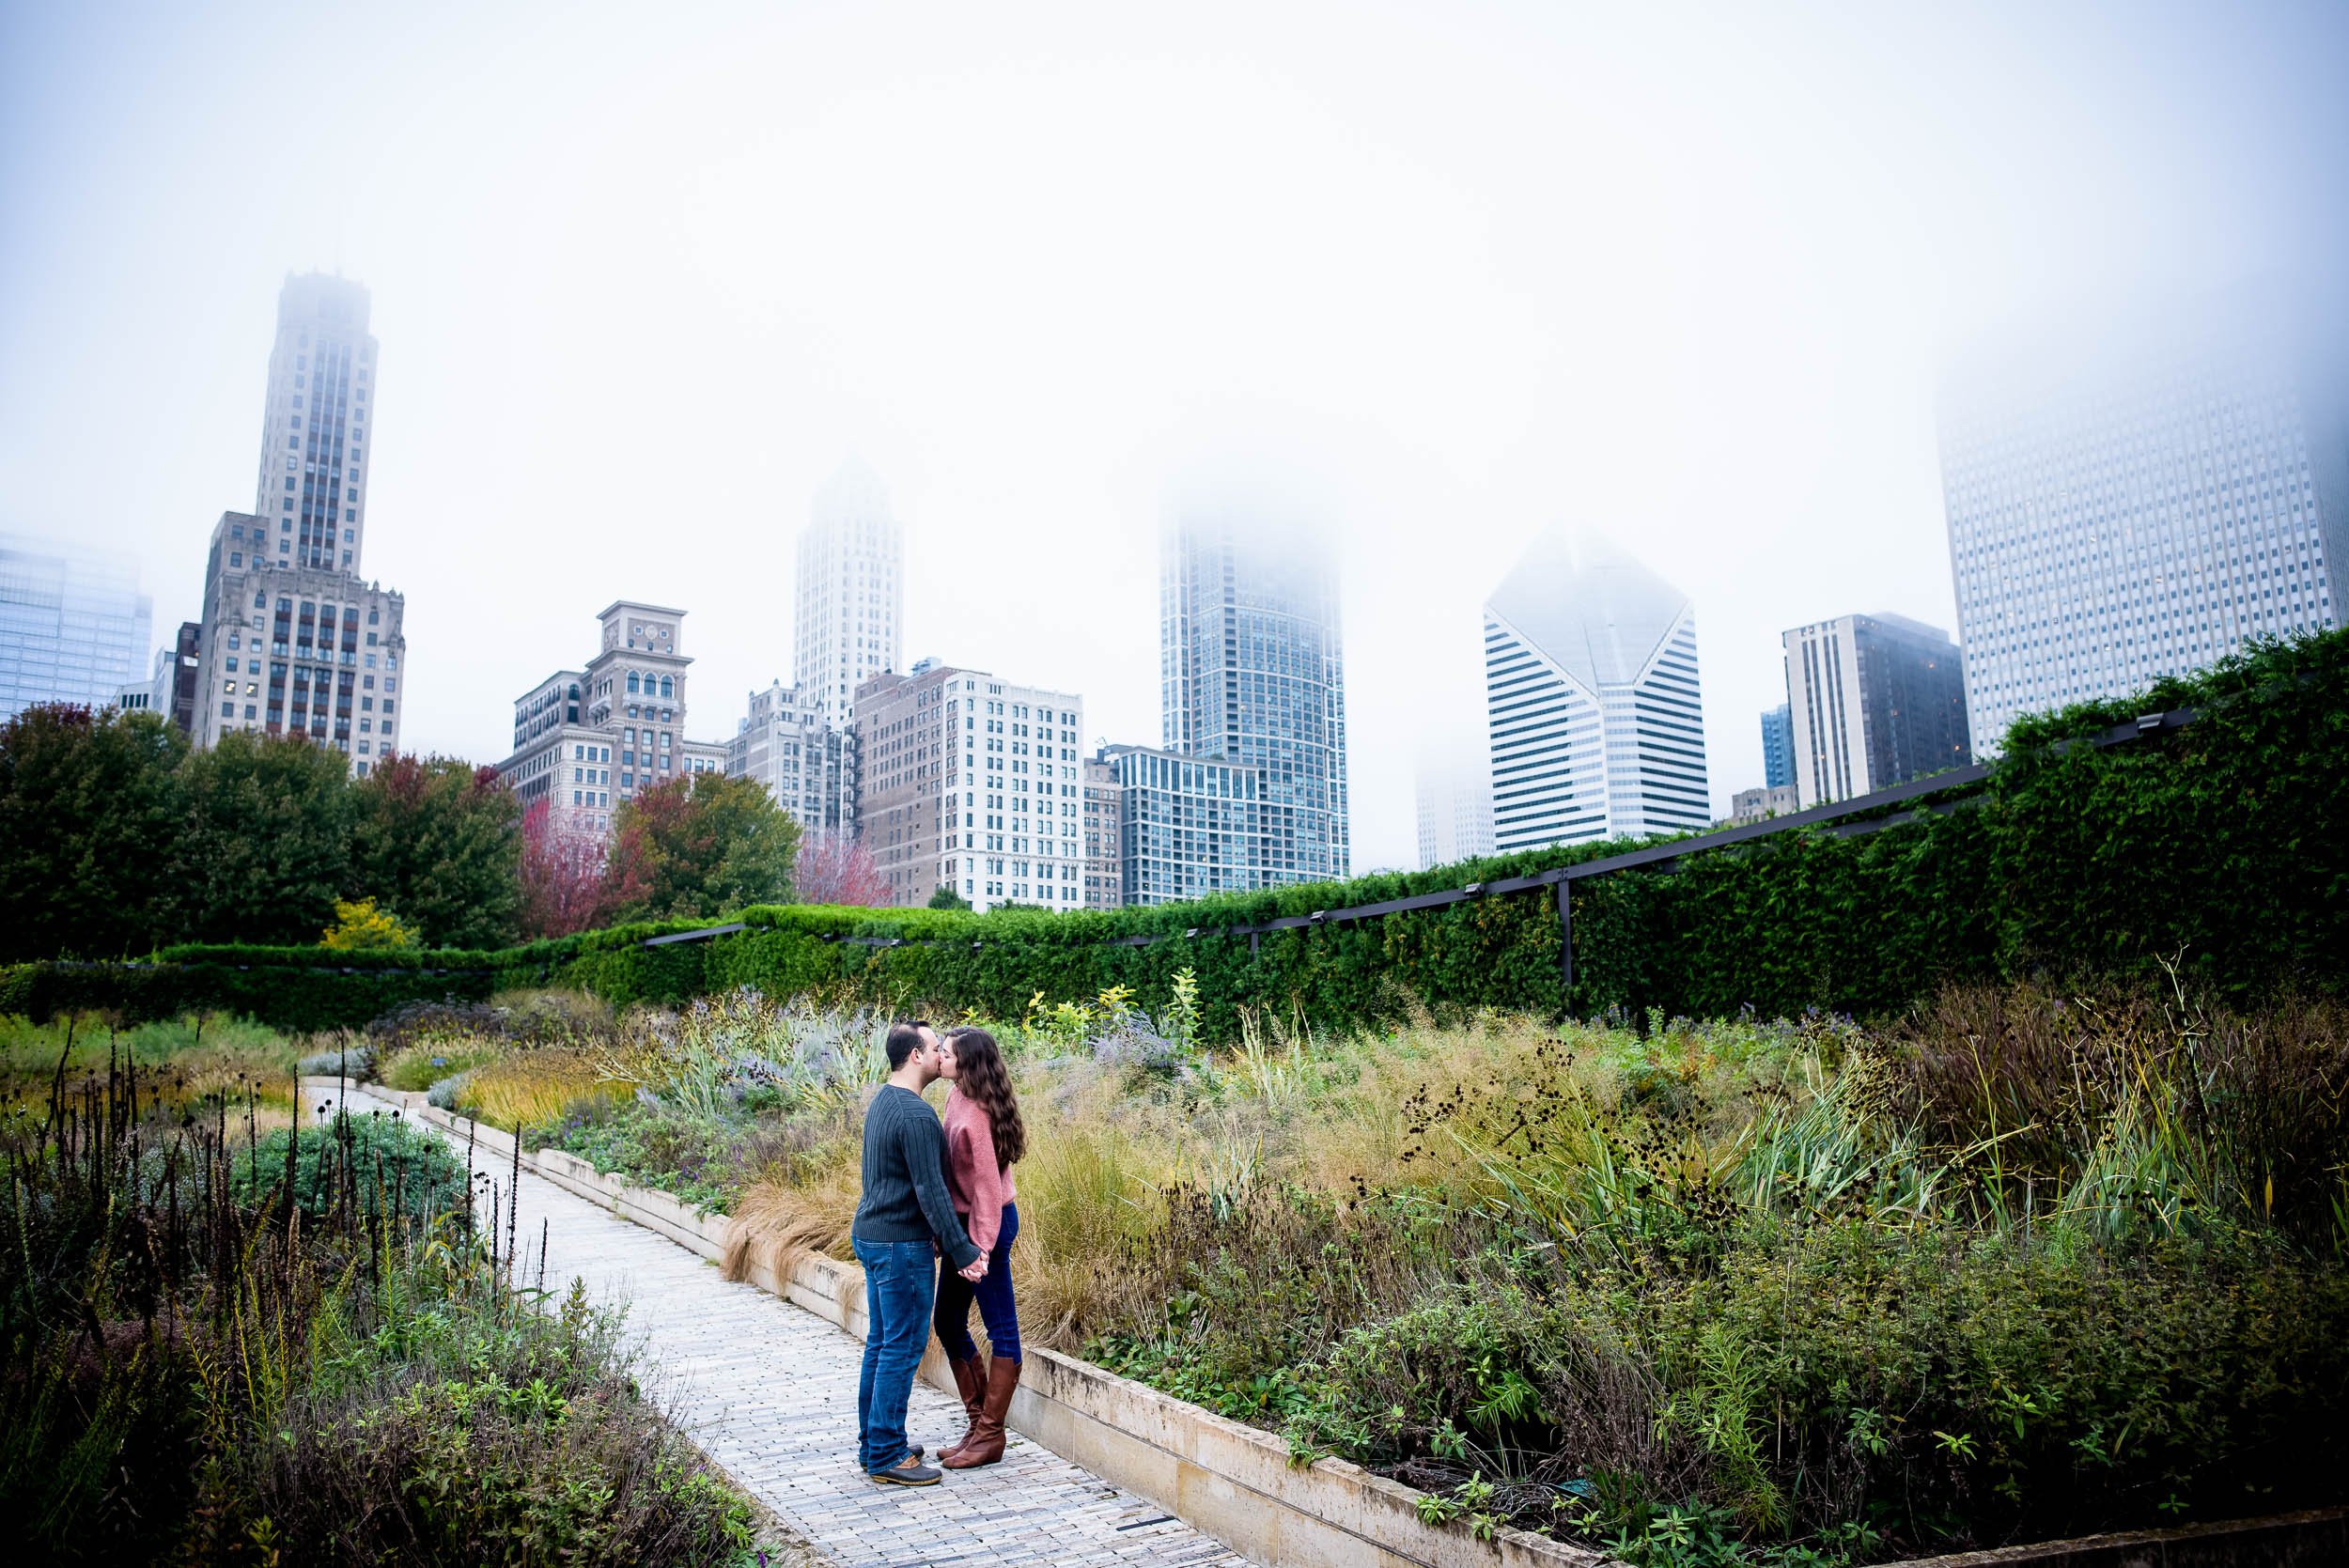 Downtown Chicago engagement session captured by J. Brown Photography. See more engagement photo ideas at jbrownphotography.com!